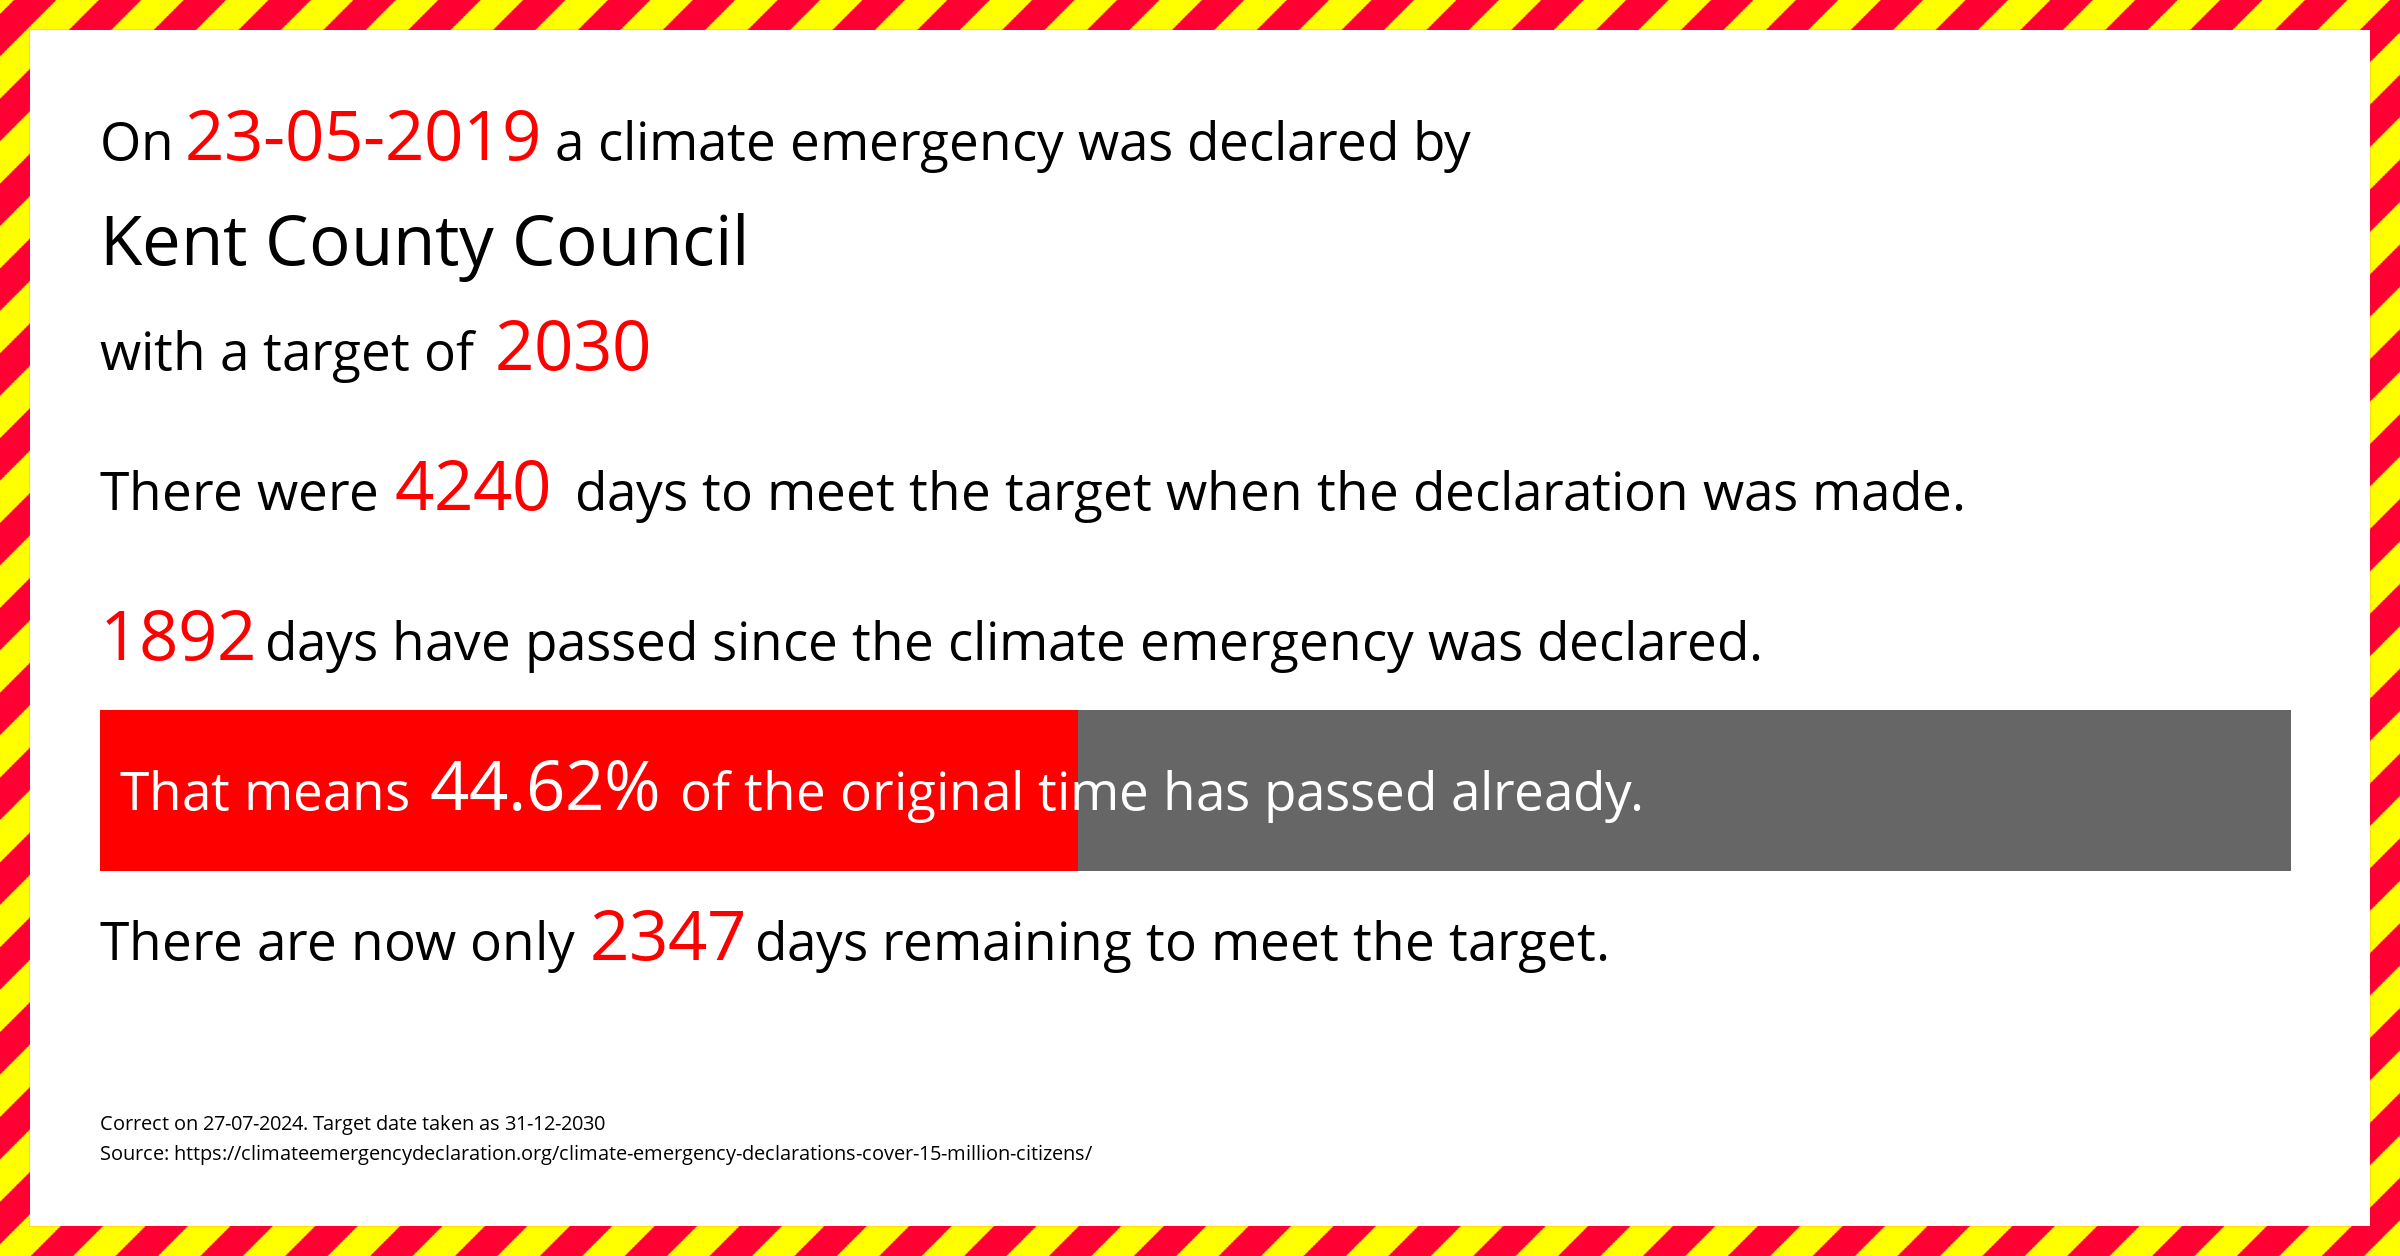 Kent County Council declared a Climate emergency on Thursday 23rd May 2019, with a target of 2030.